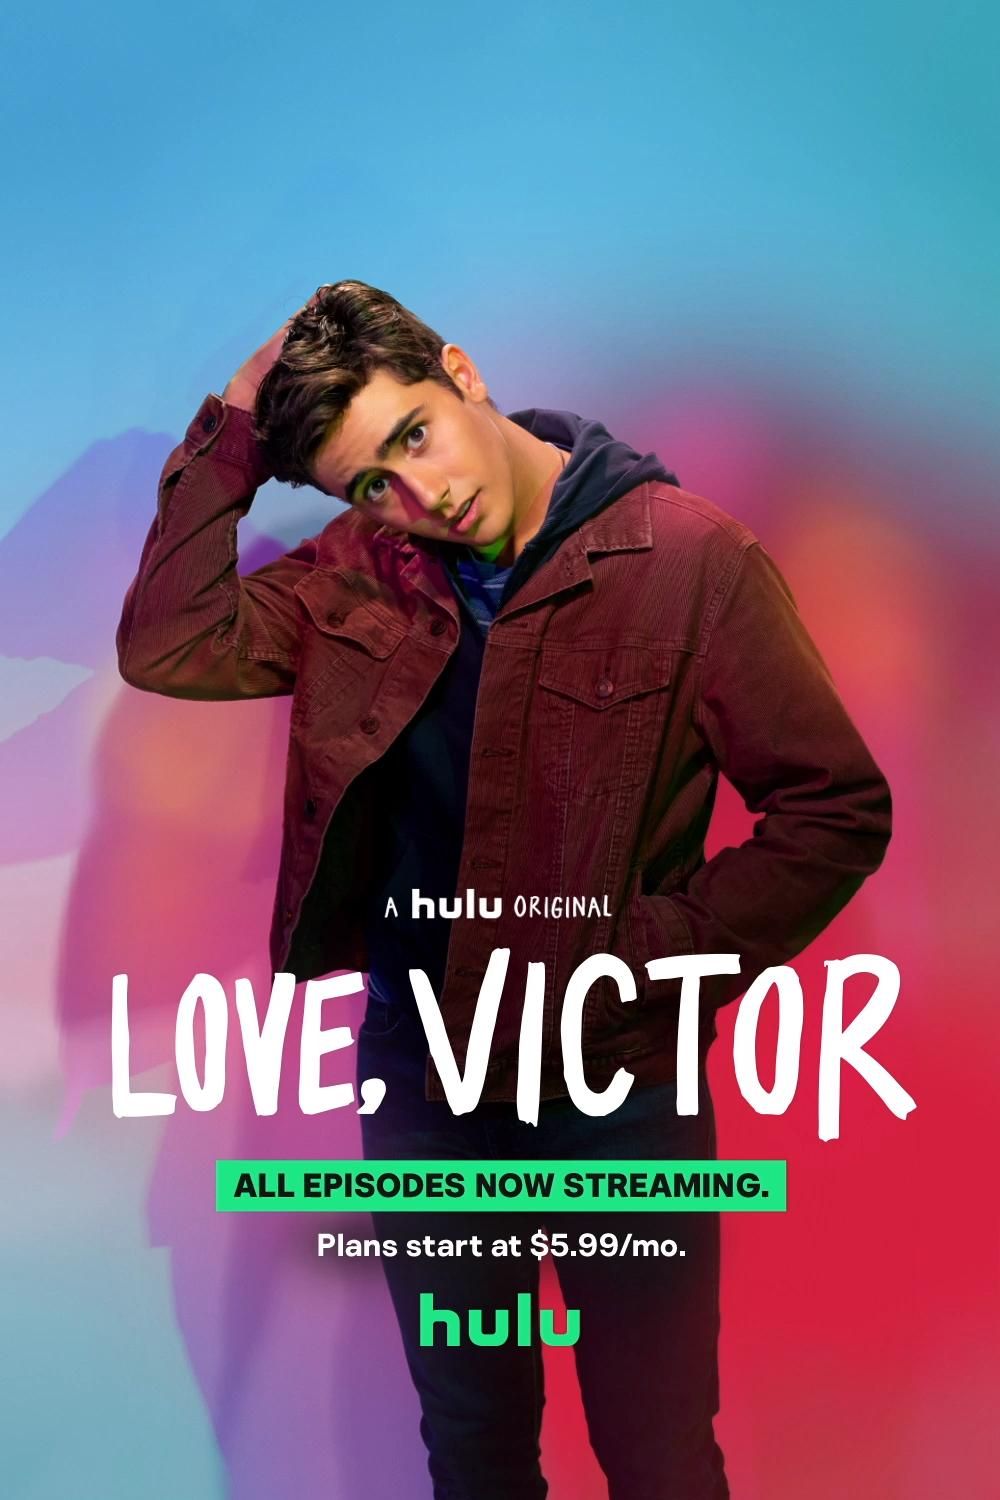 Watch Love, Victor on Hulu. New movies to watch, Victor, Book club books